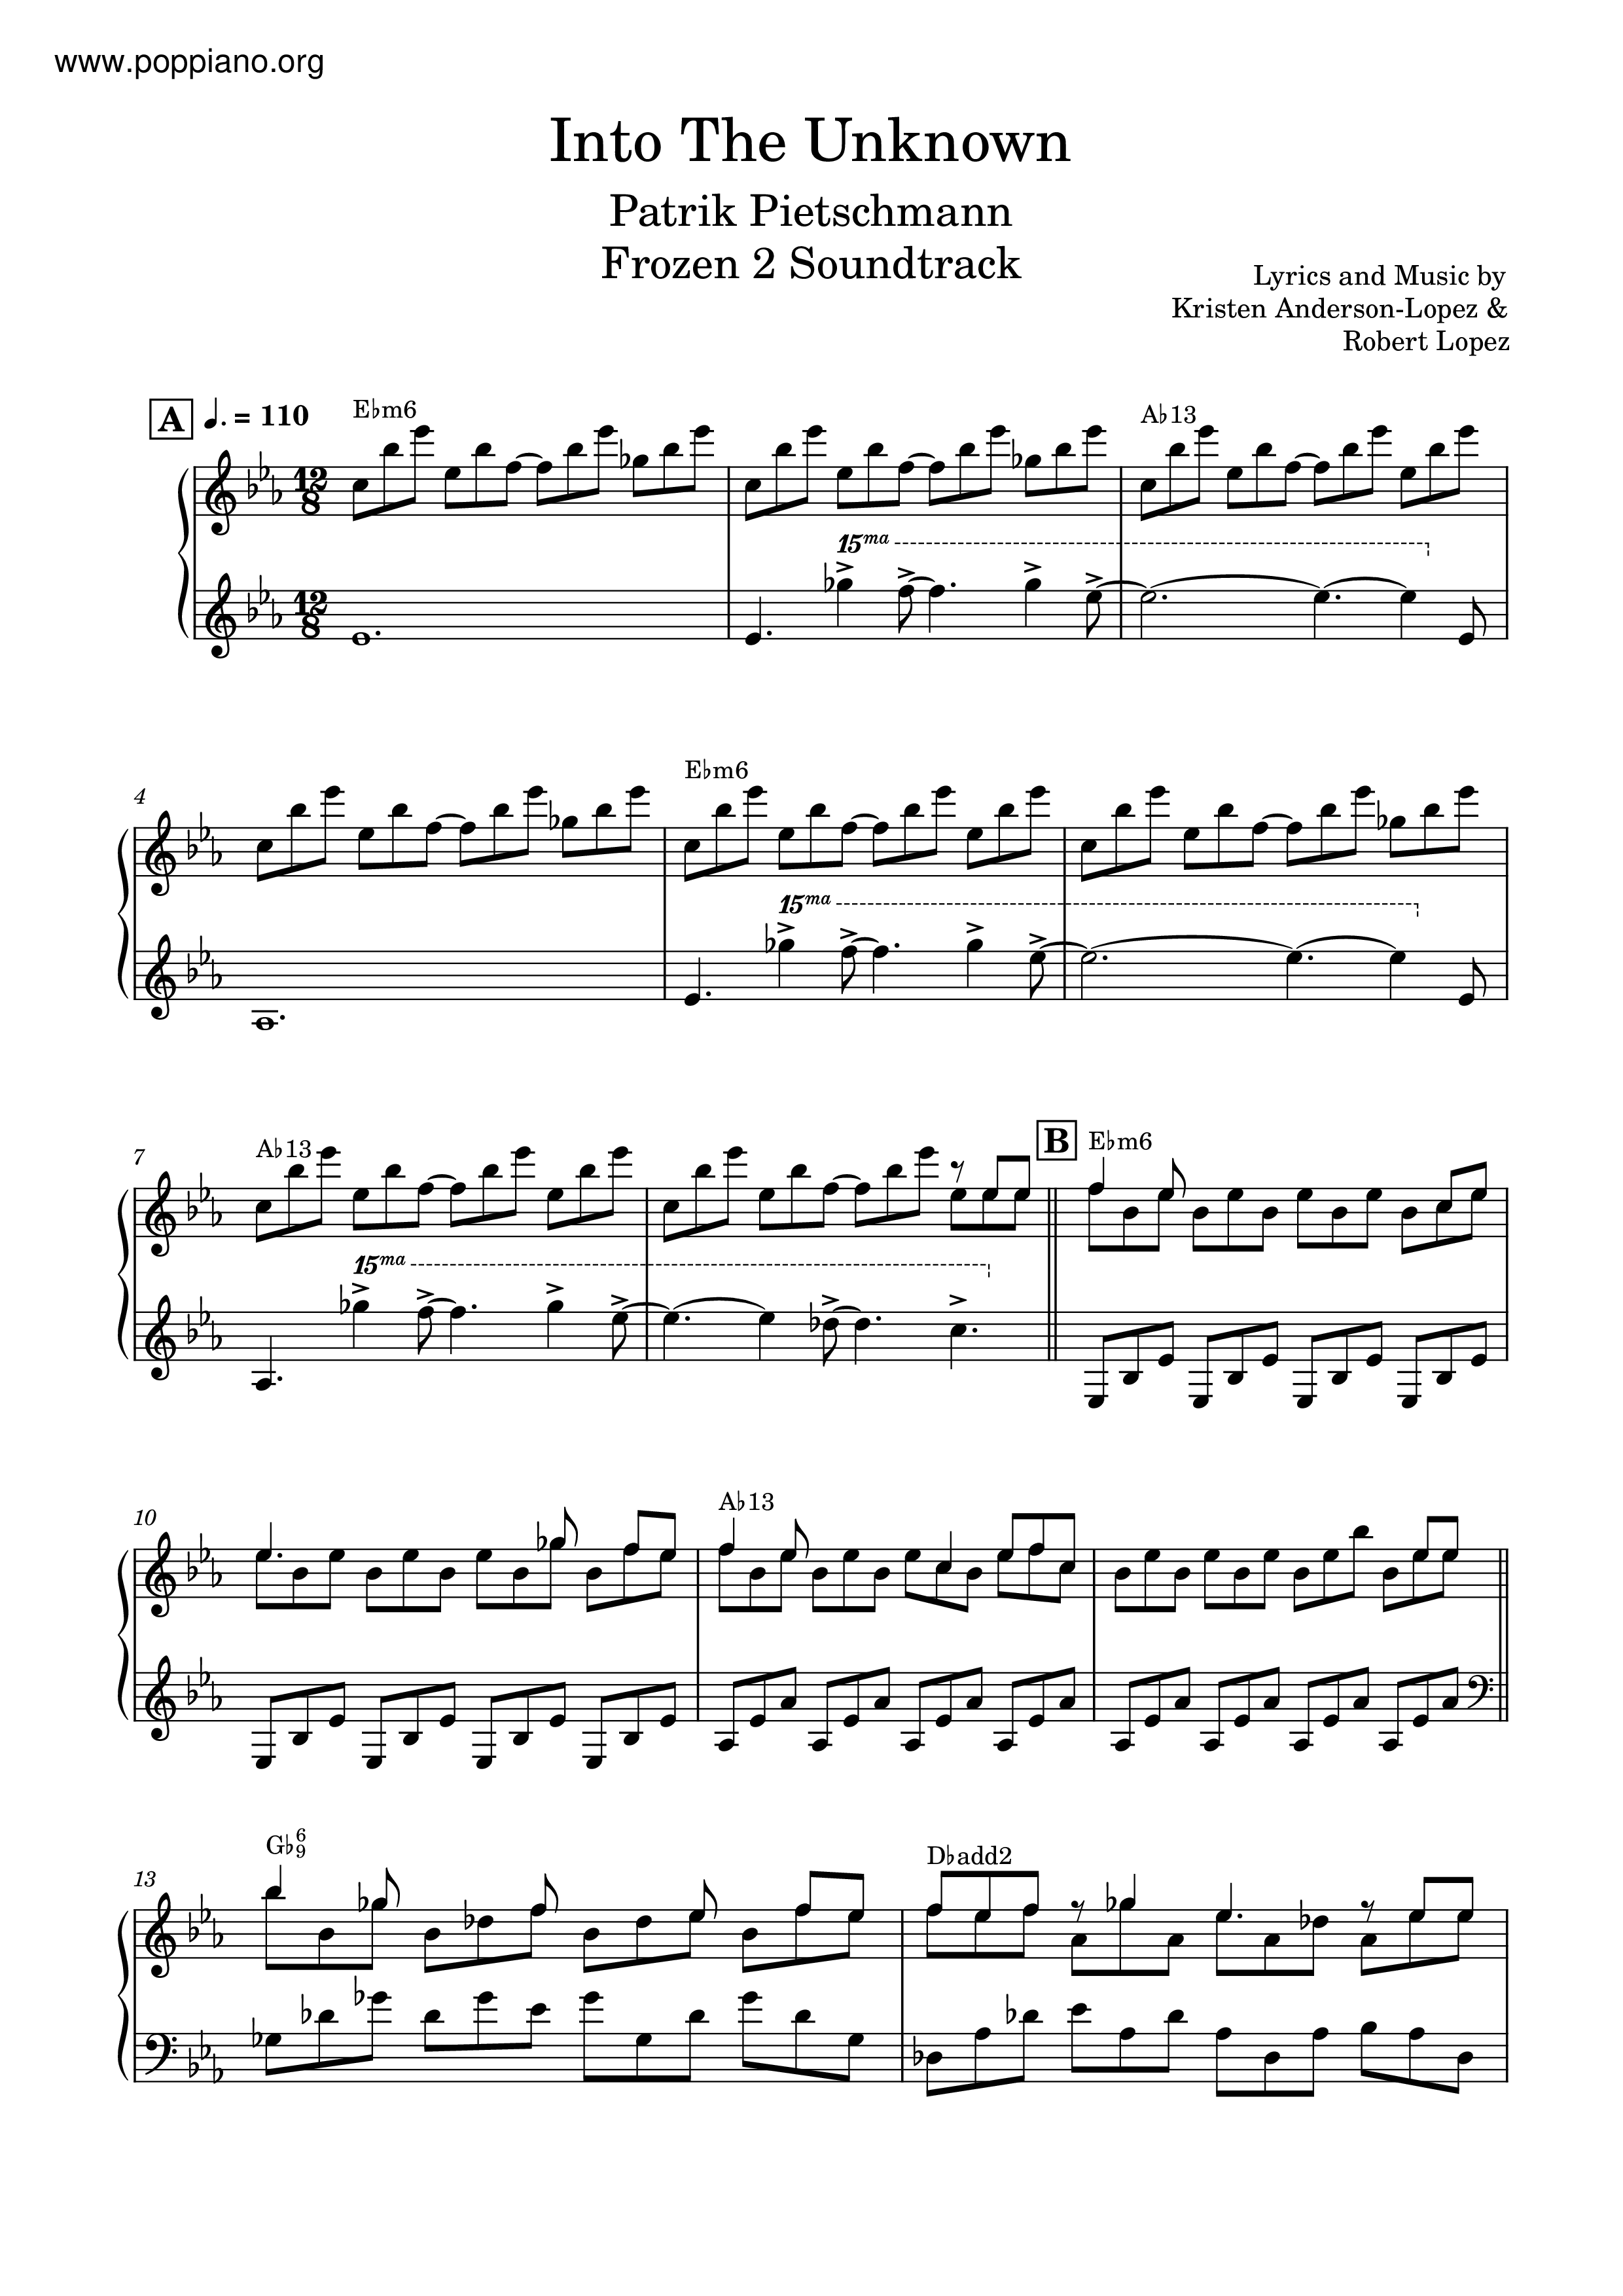 Frozen 2 - Into The Unknown Score